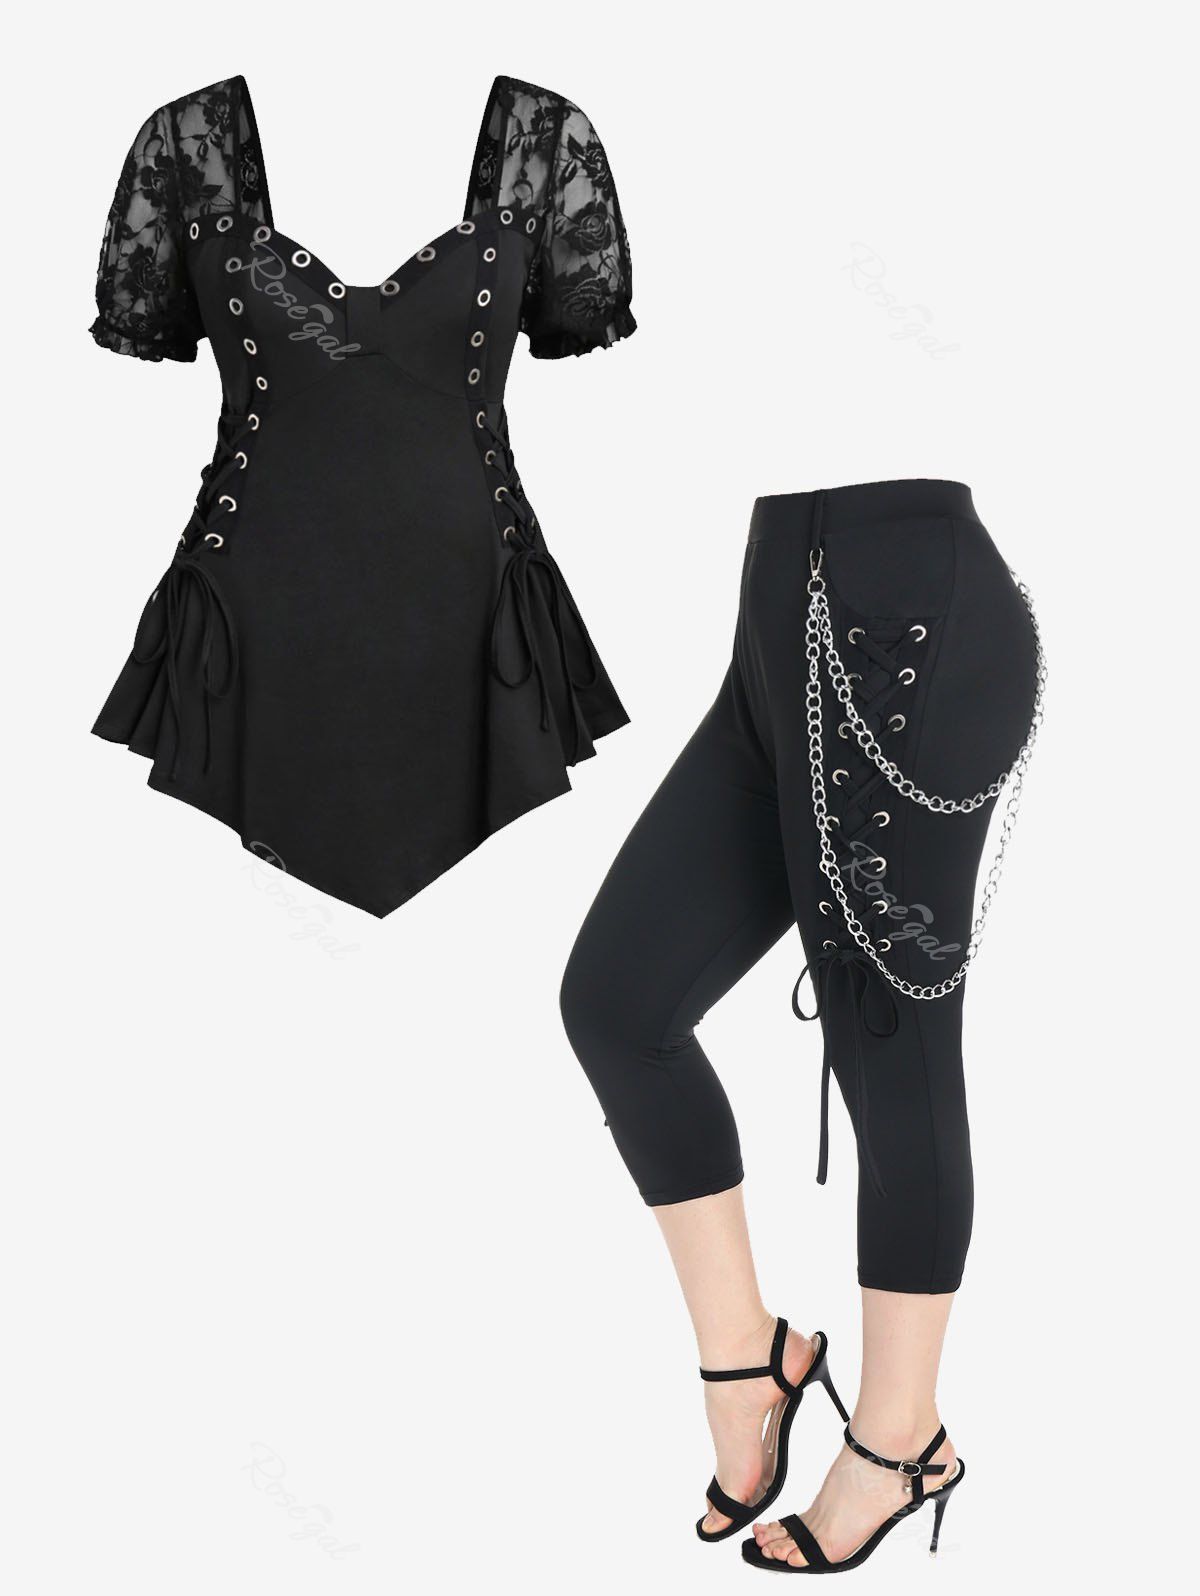 New Lace Up Asymmetric Tee and Punk High Waist Lace Up Chains Capri Pants Plus Size Summer Outfit  